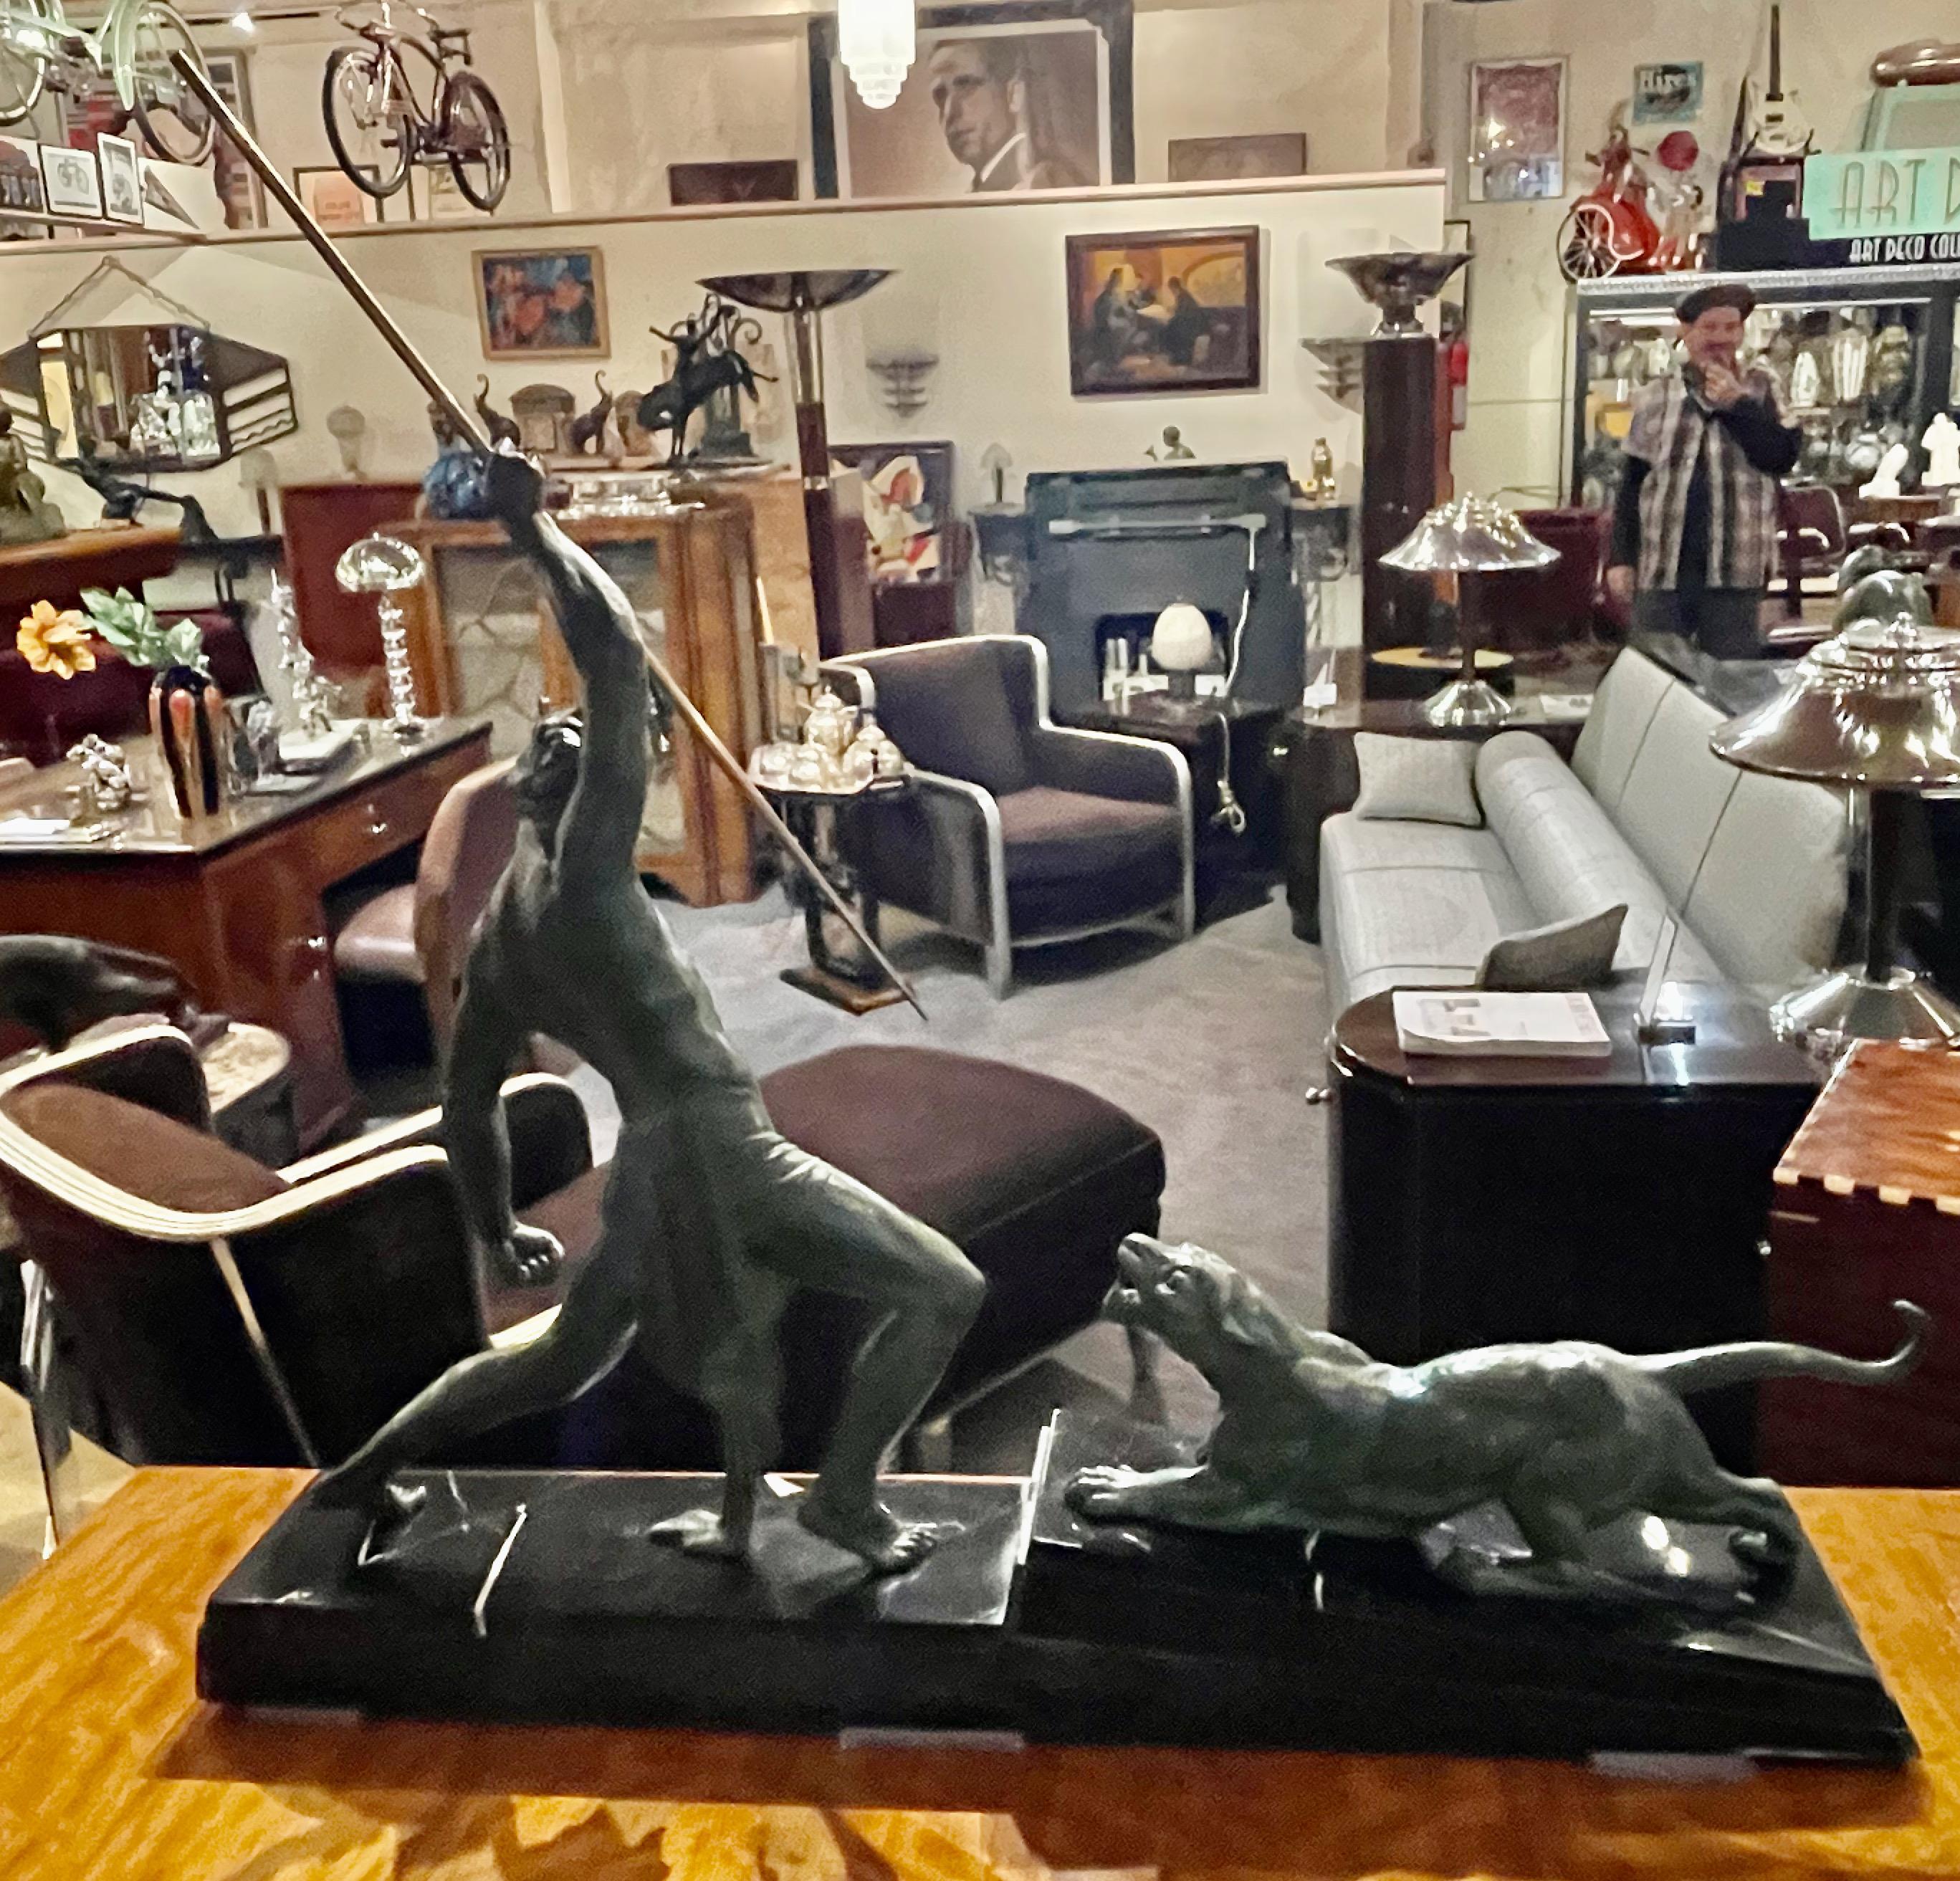 Chiparus 'The Hunter' Large Art Deco Sculpture with Panther, 1930 For Sale 8